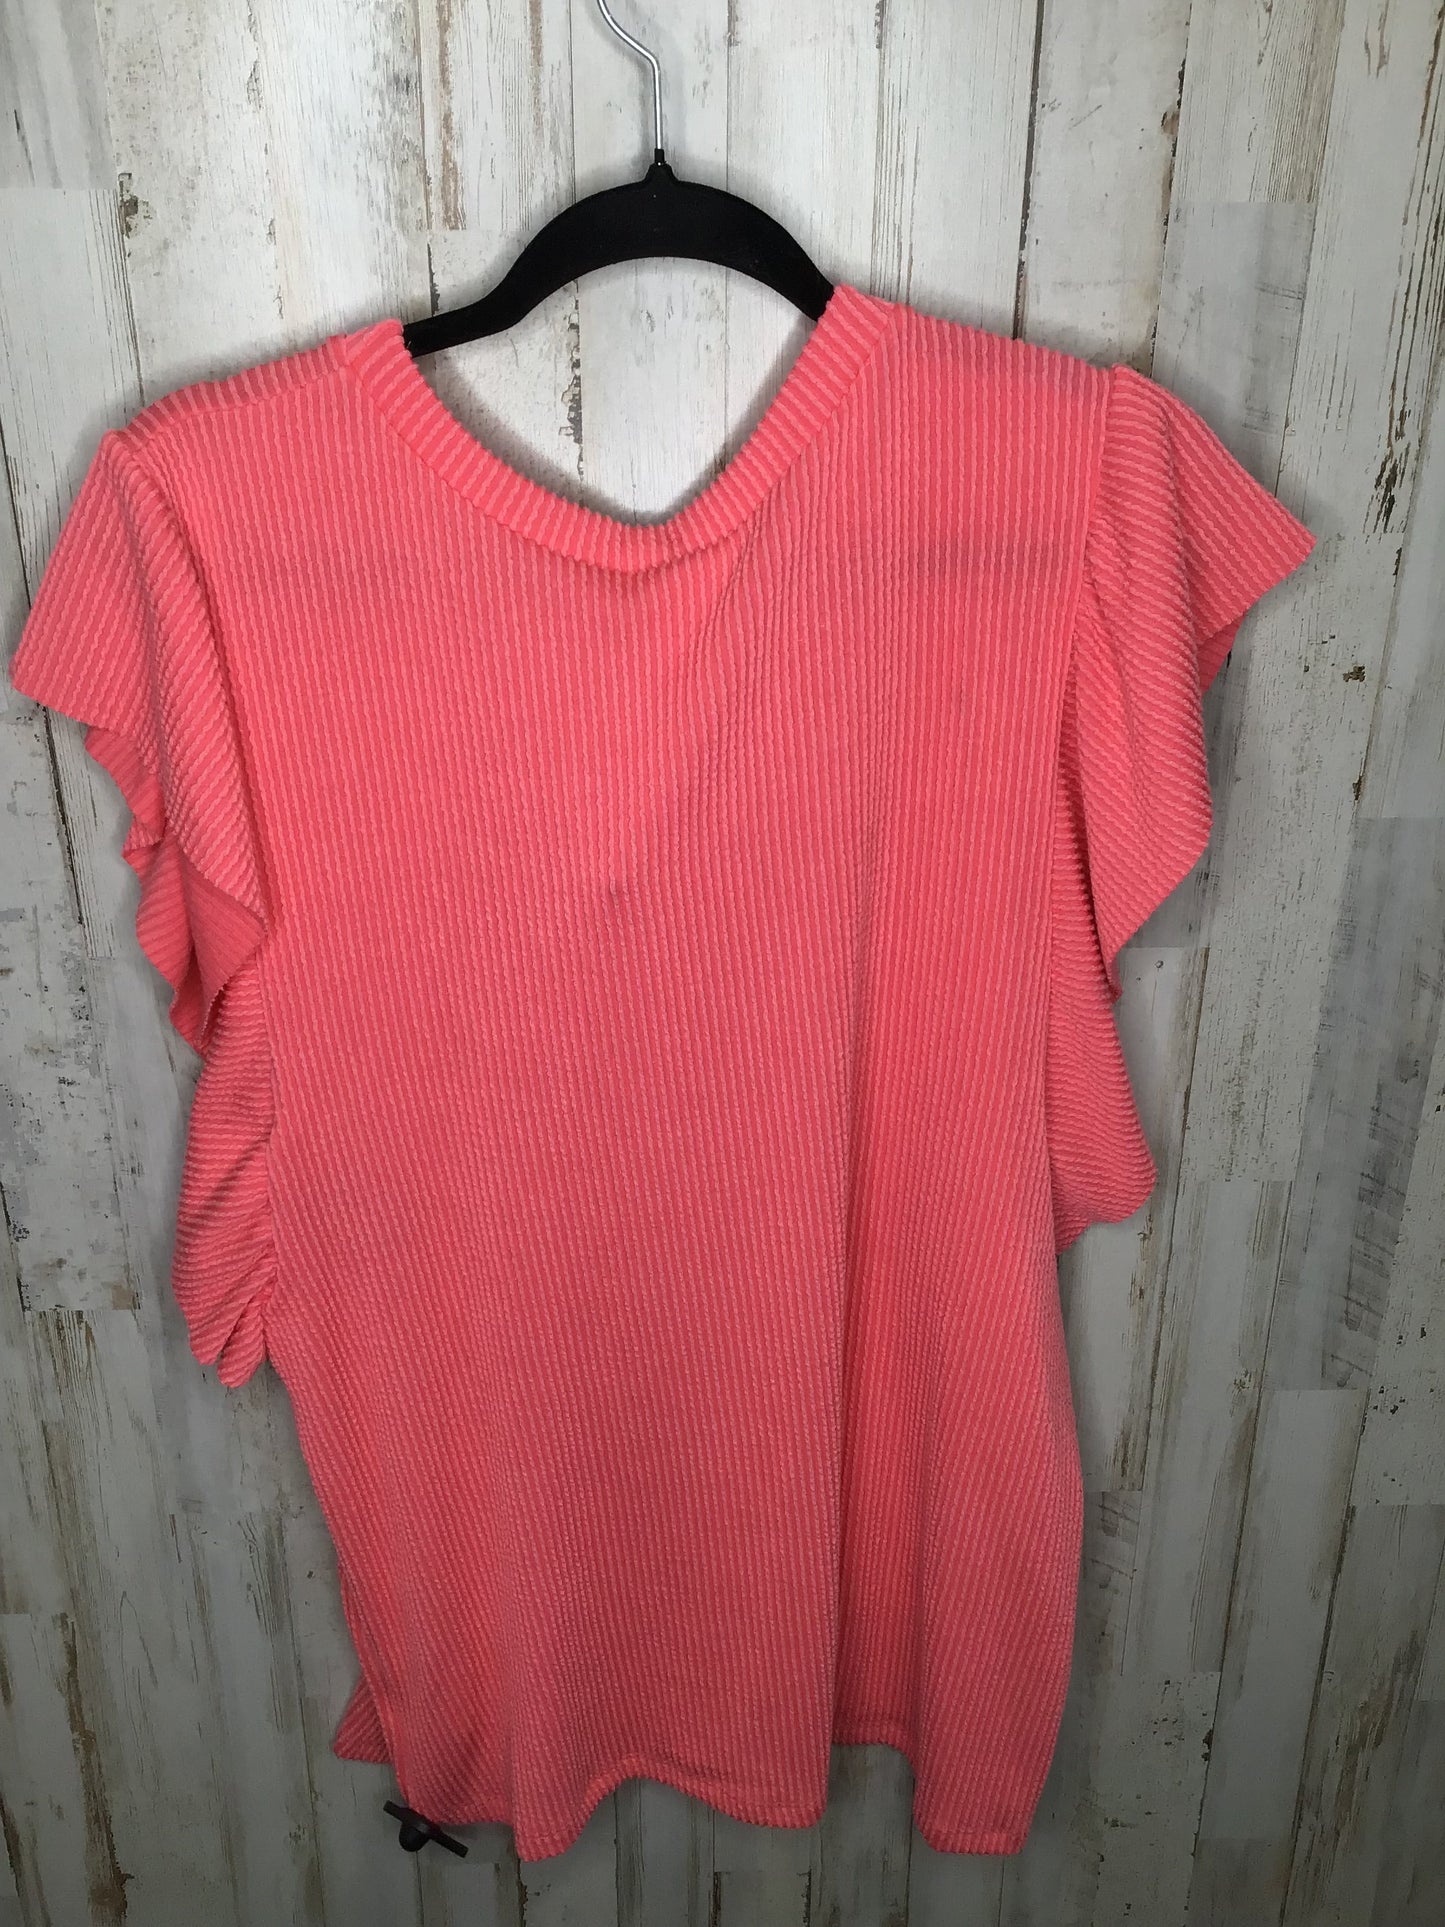 Pink Top Short Sleeve Lovely Melody, Size 1x